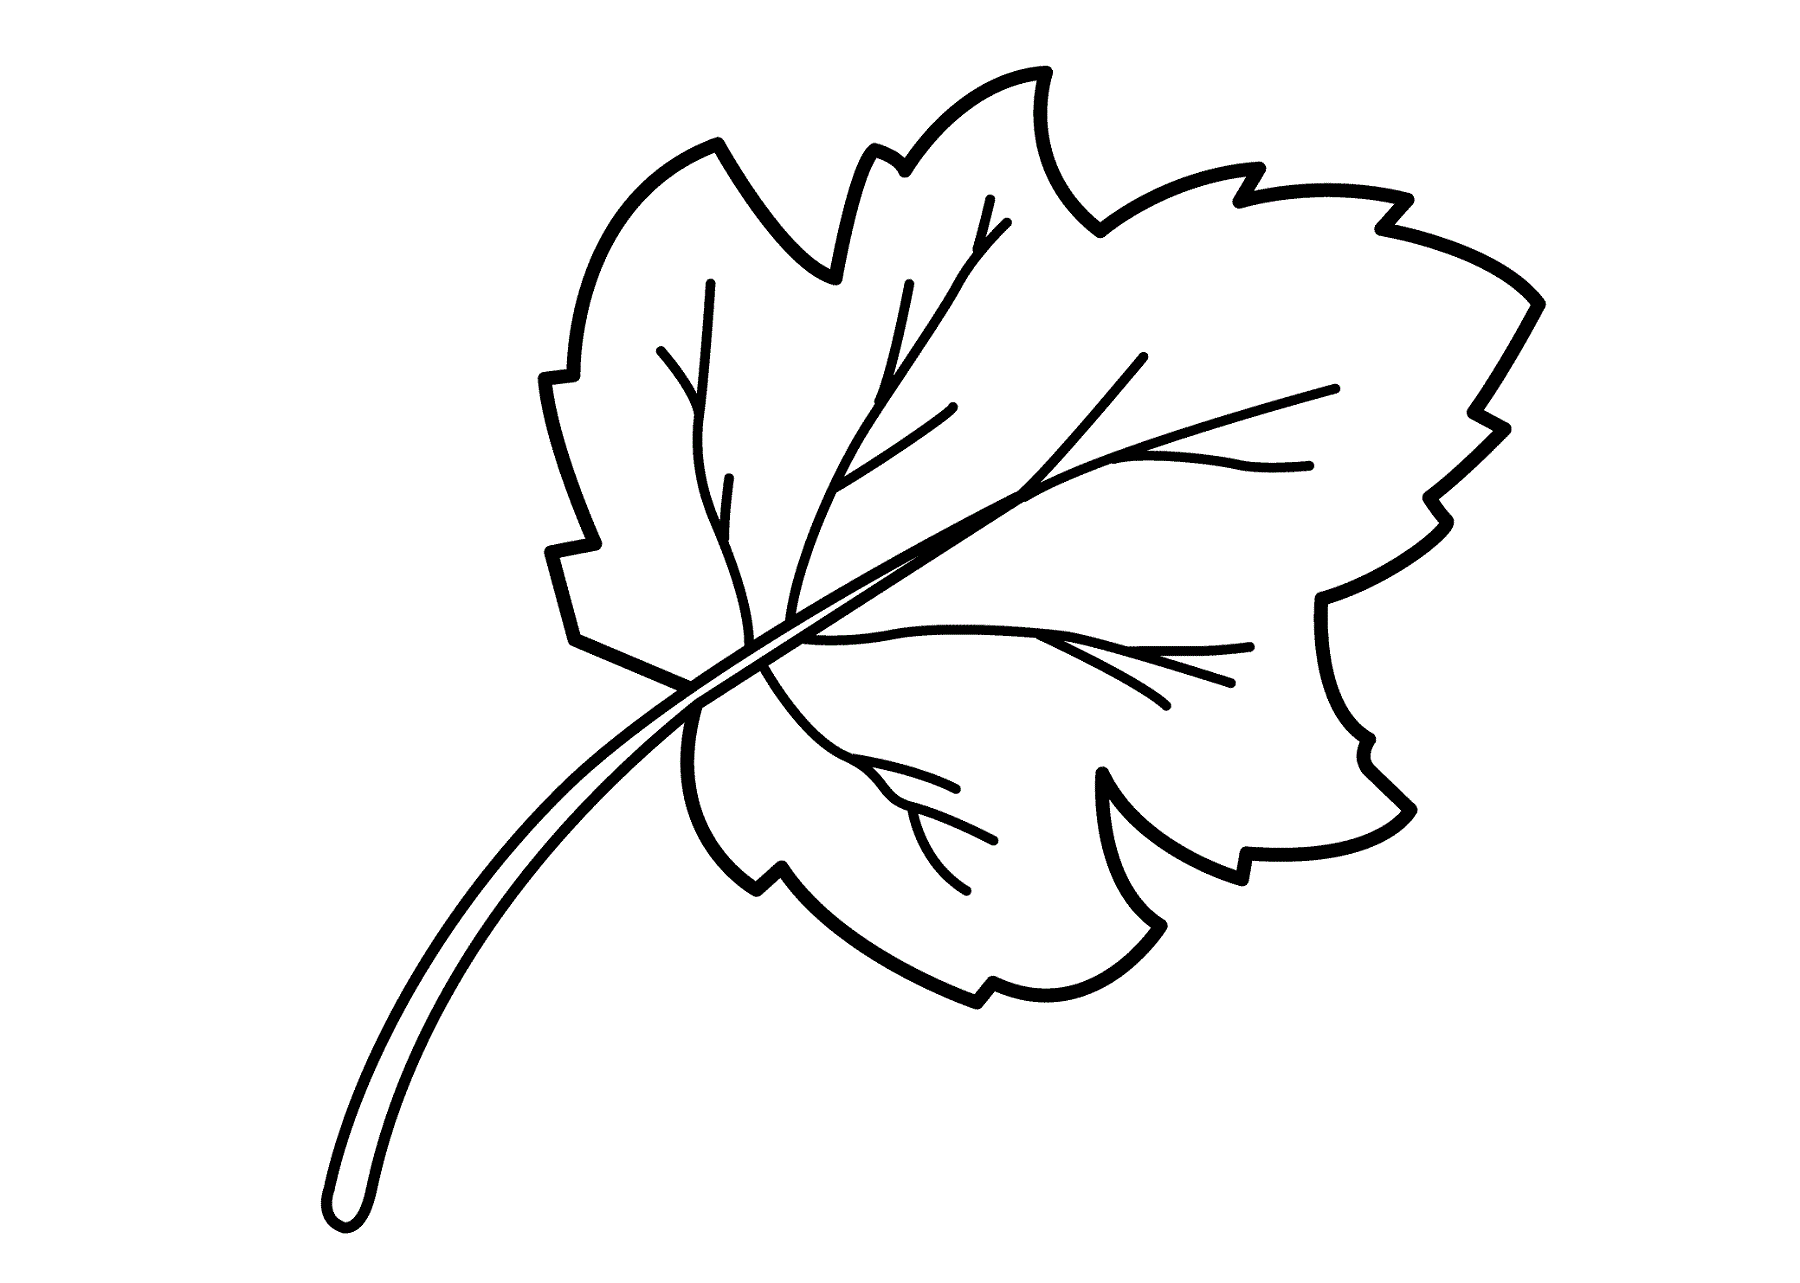 Leaf Coloring Pages for Preschool Activity Shelter